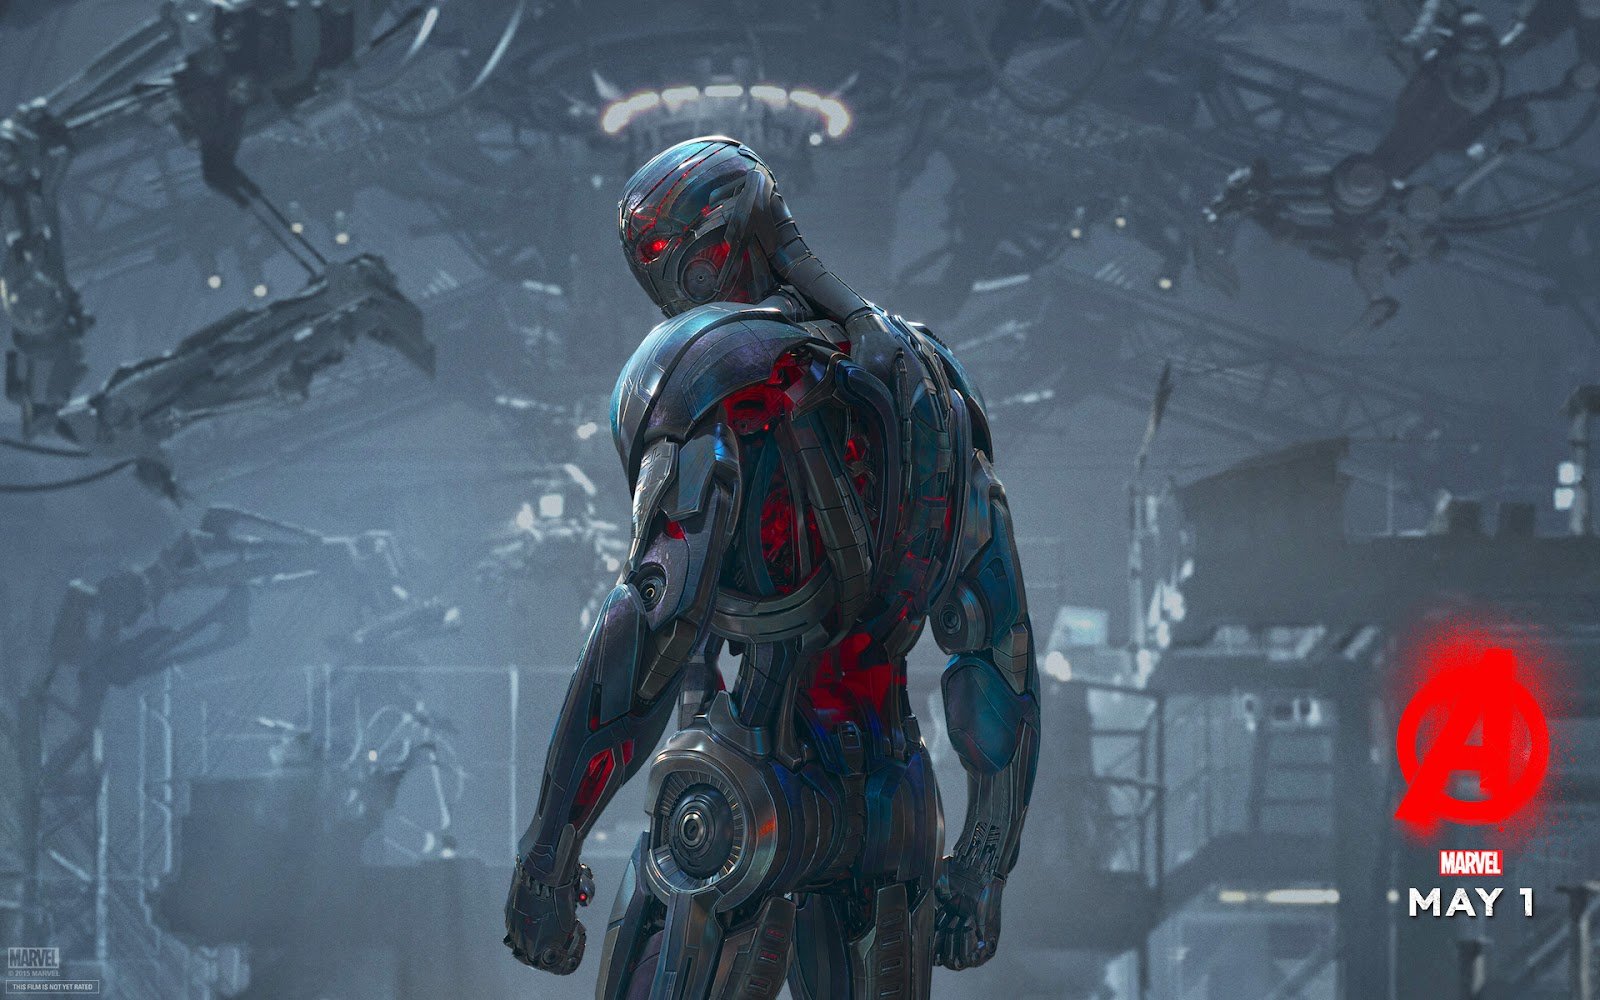 Avengers Age of Ultron 2015 Wallpaper KFZoom